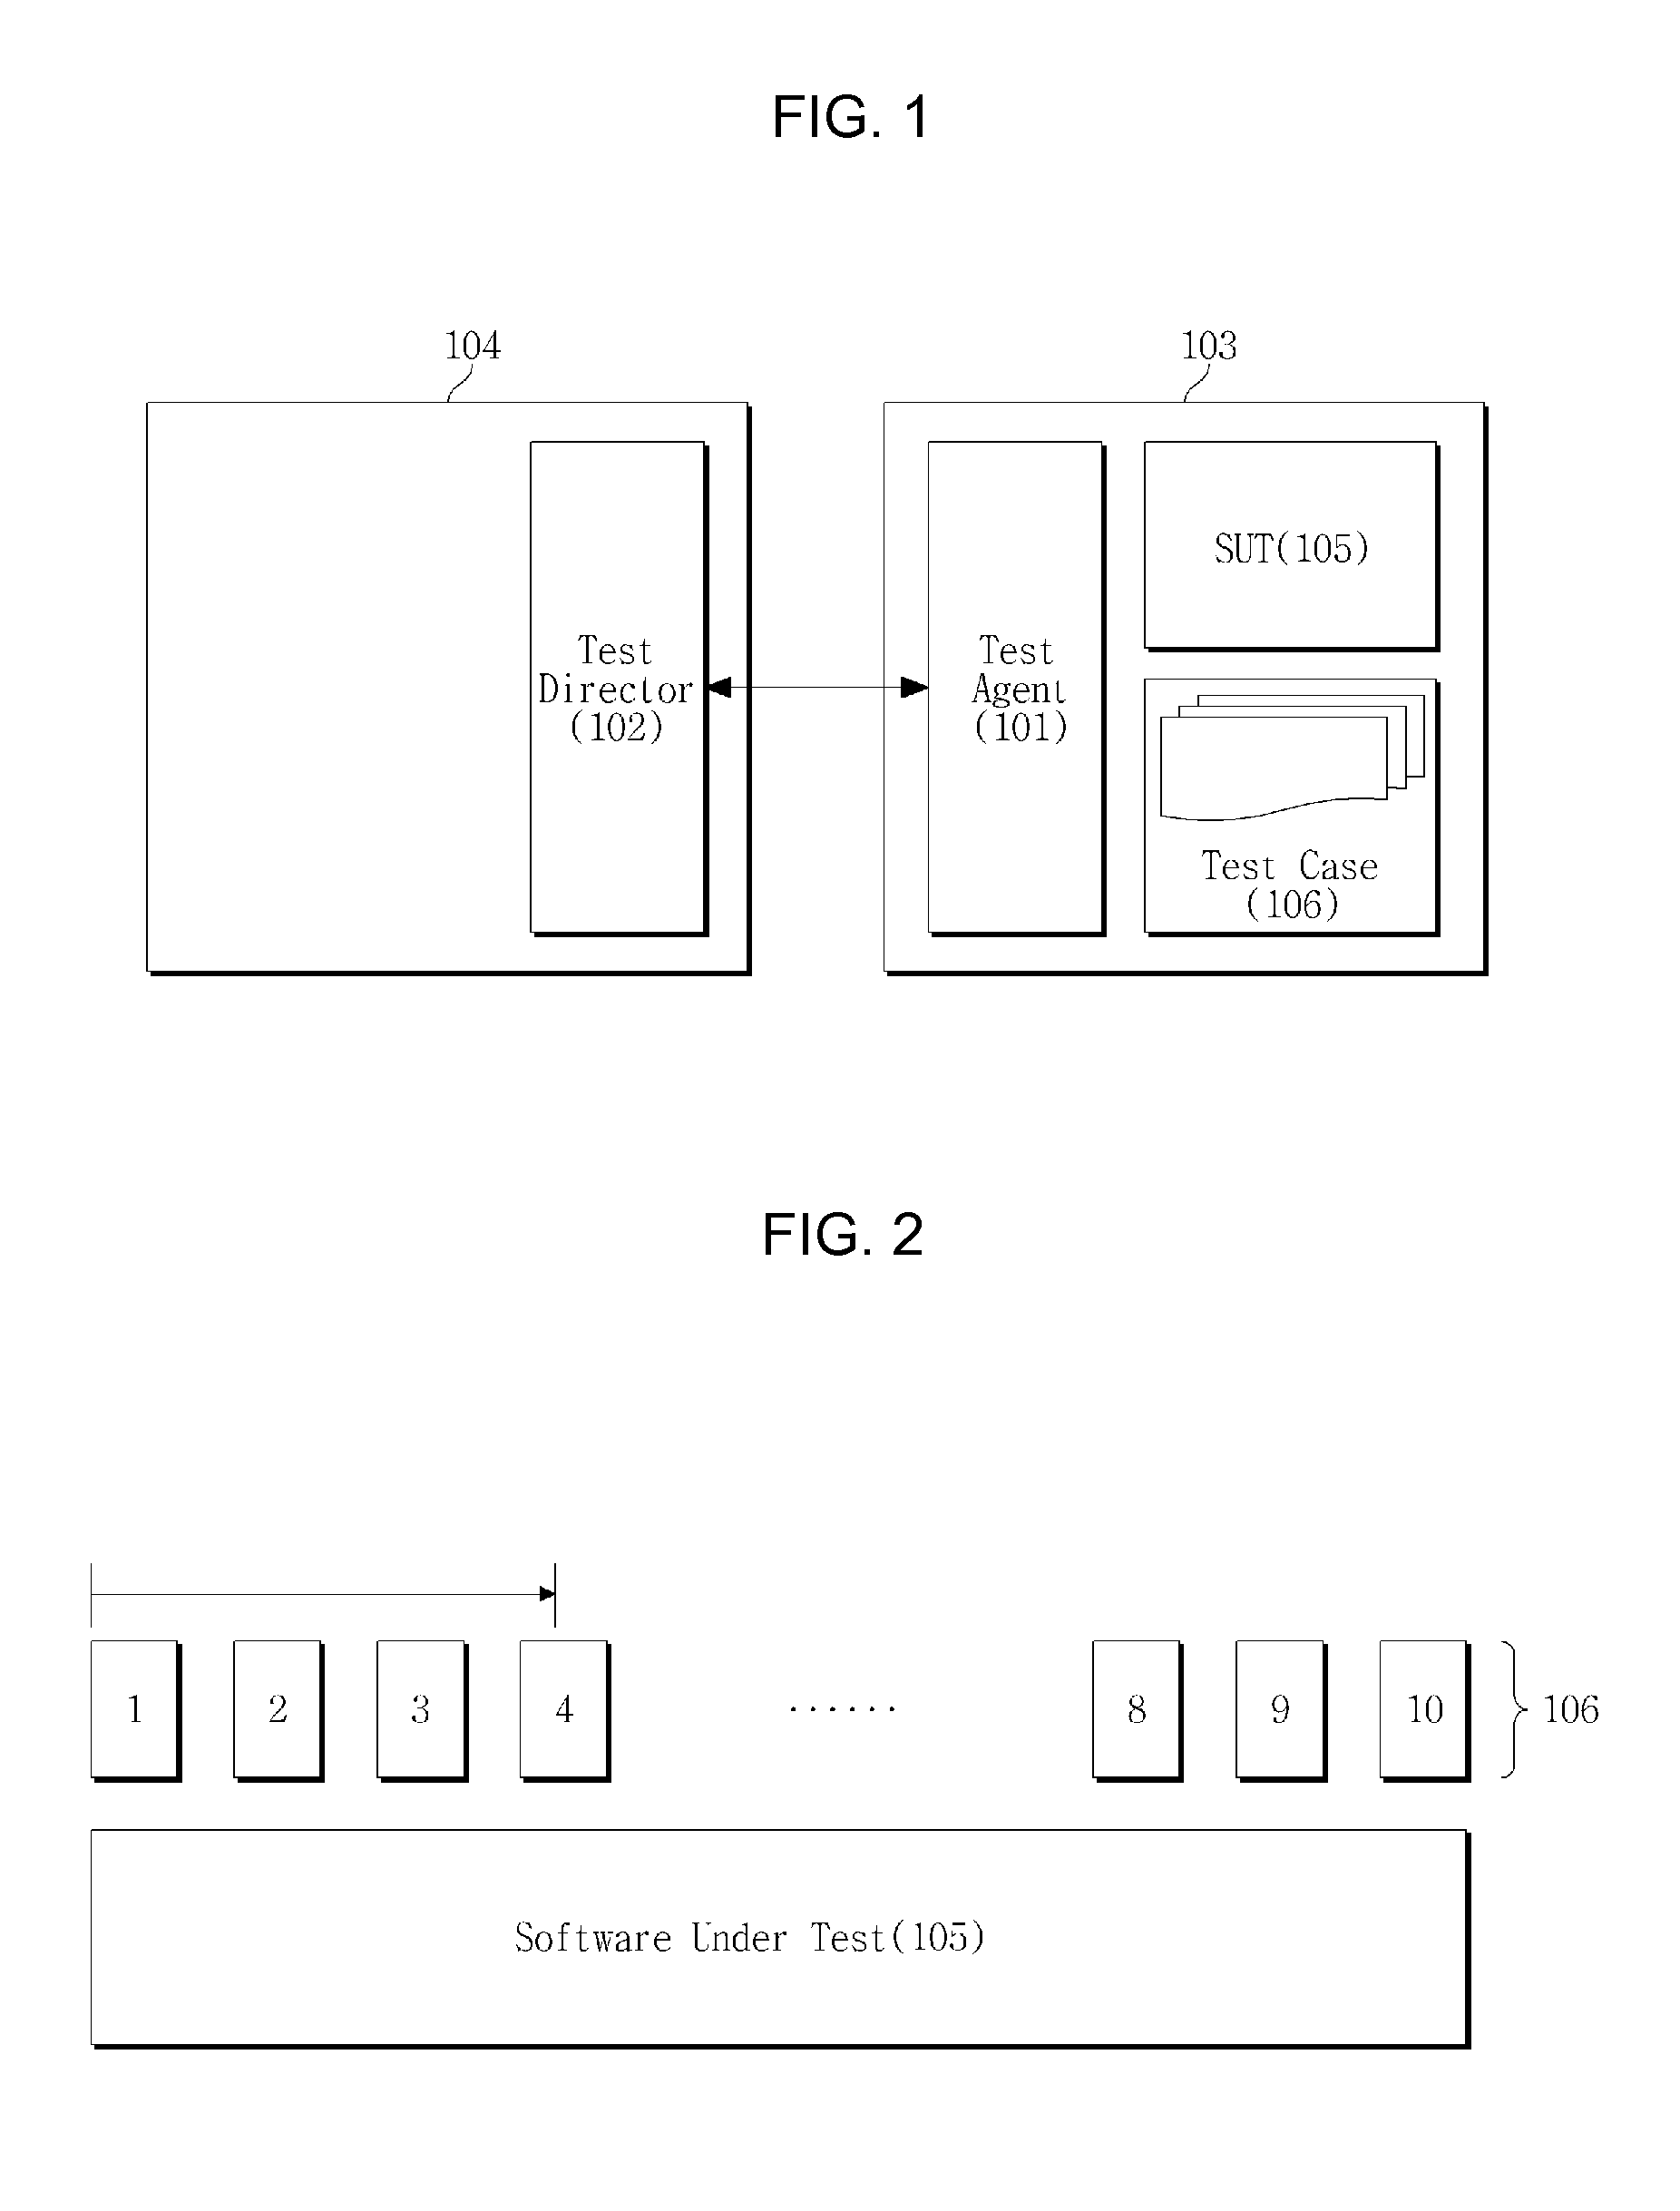 Apparatus and method for automatic testing of software or digital devices